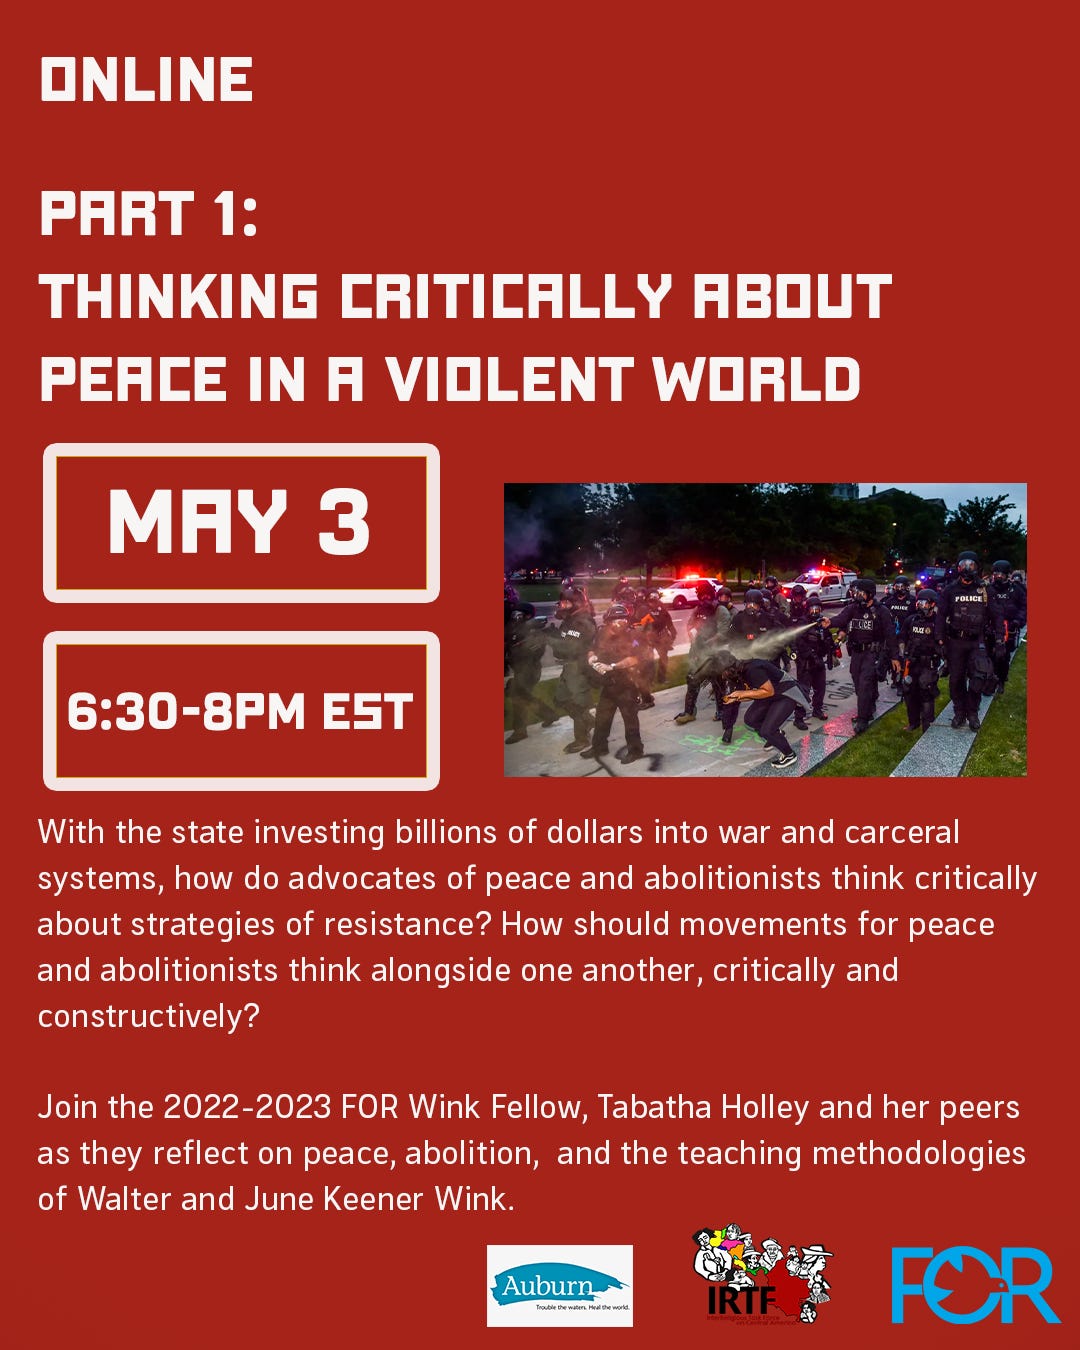 Online: Part 1: Thinking Critically about peace in a violent world (May 3)